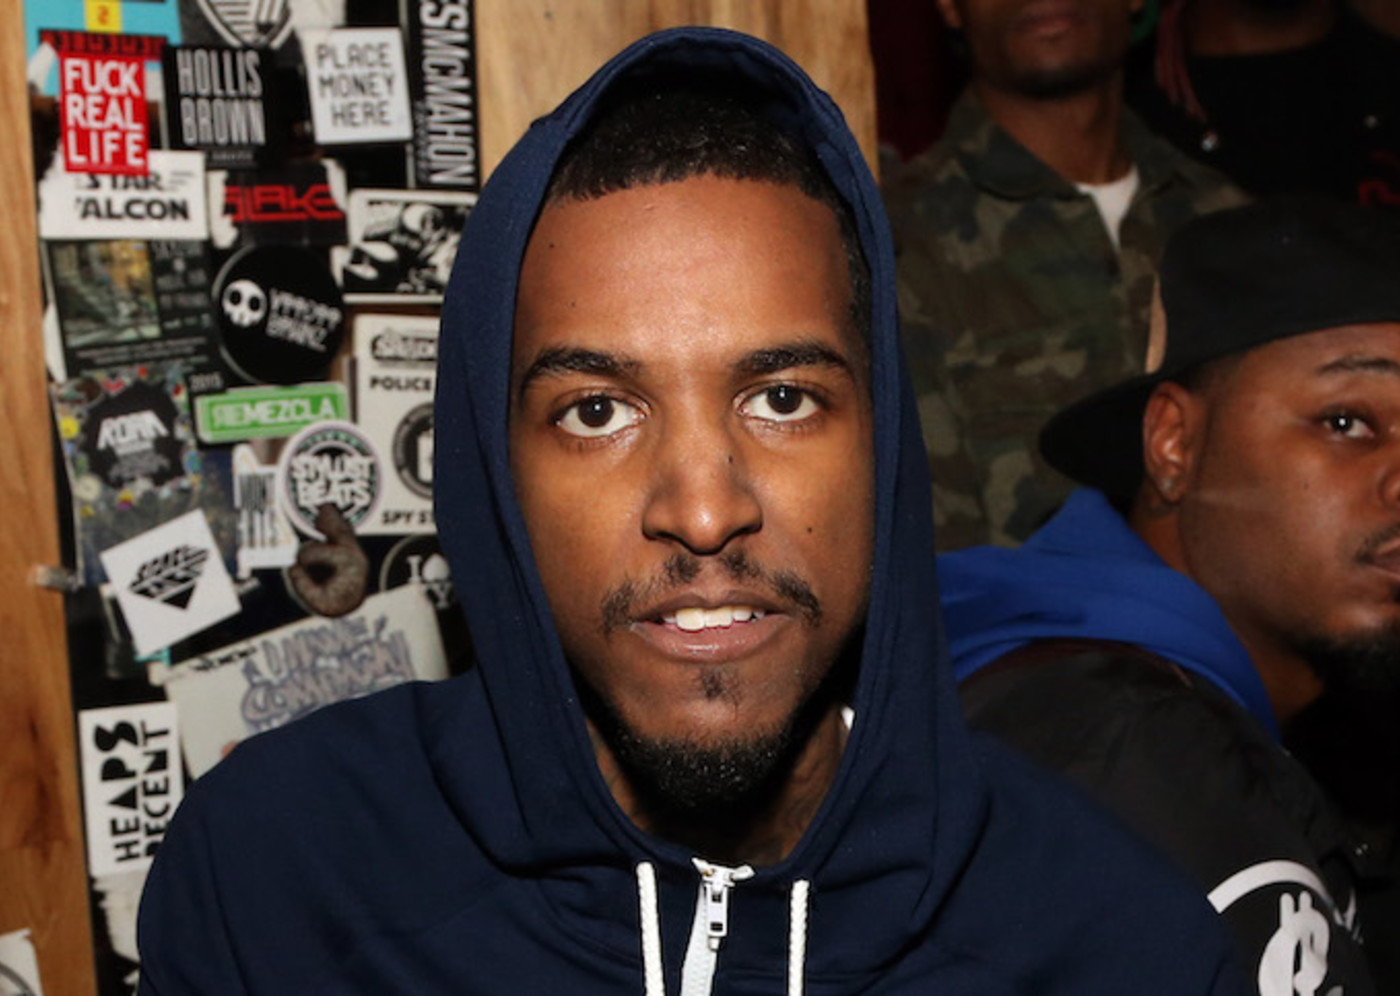 Lil Reese Wants 1 Million for First PostShooting Interview Complex